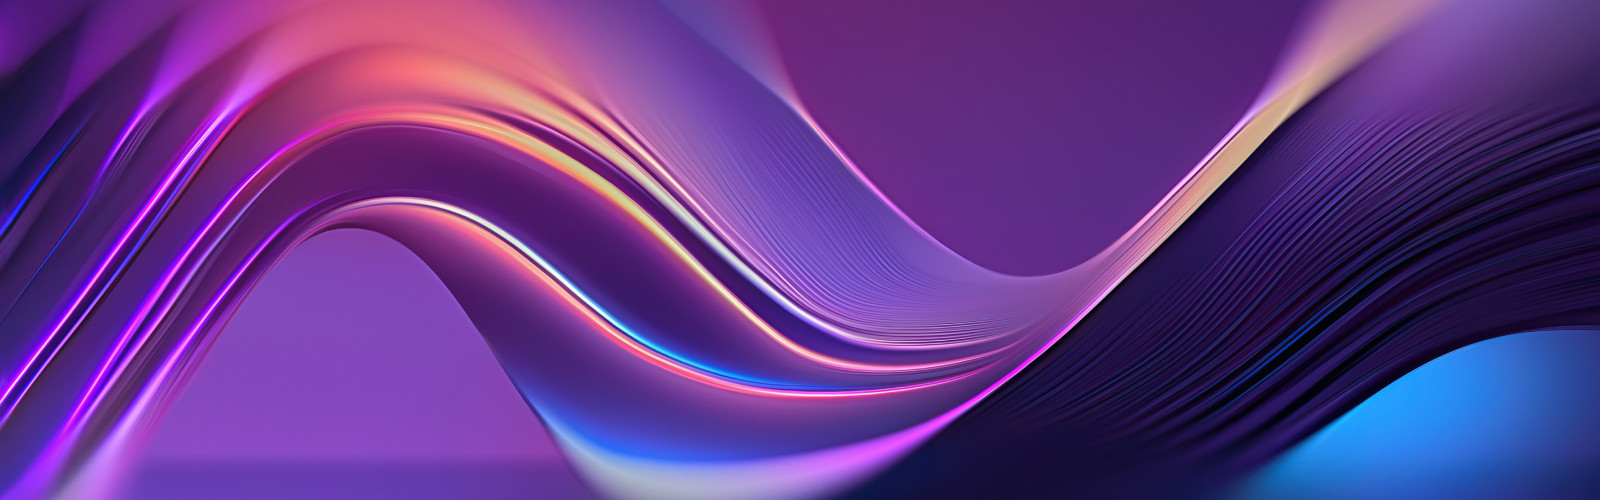 Abstract purple wave background.